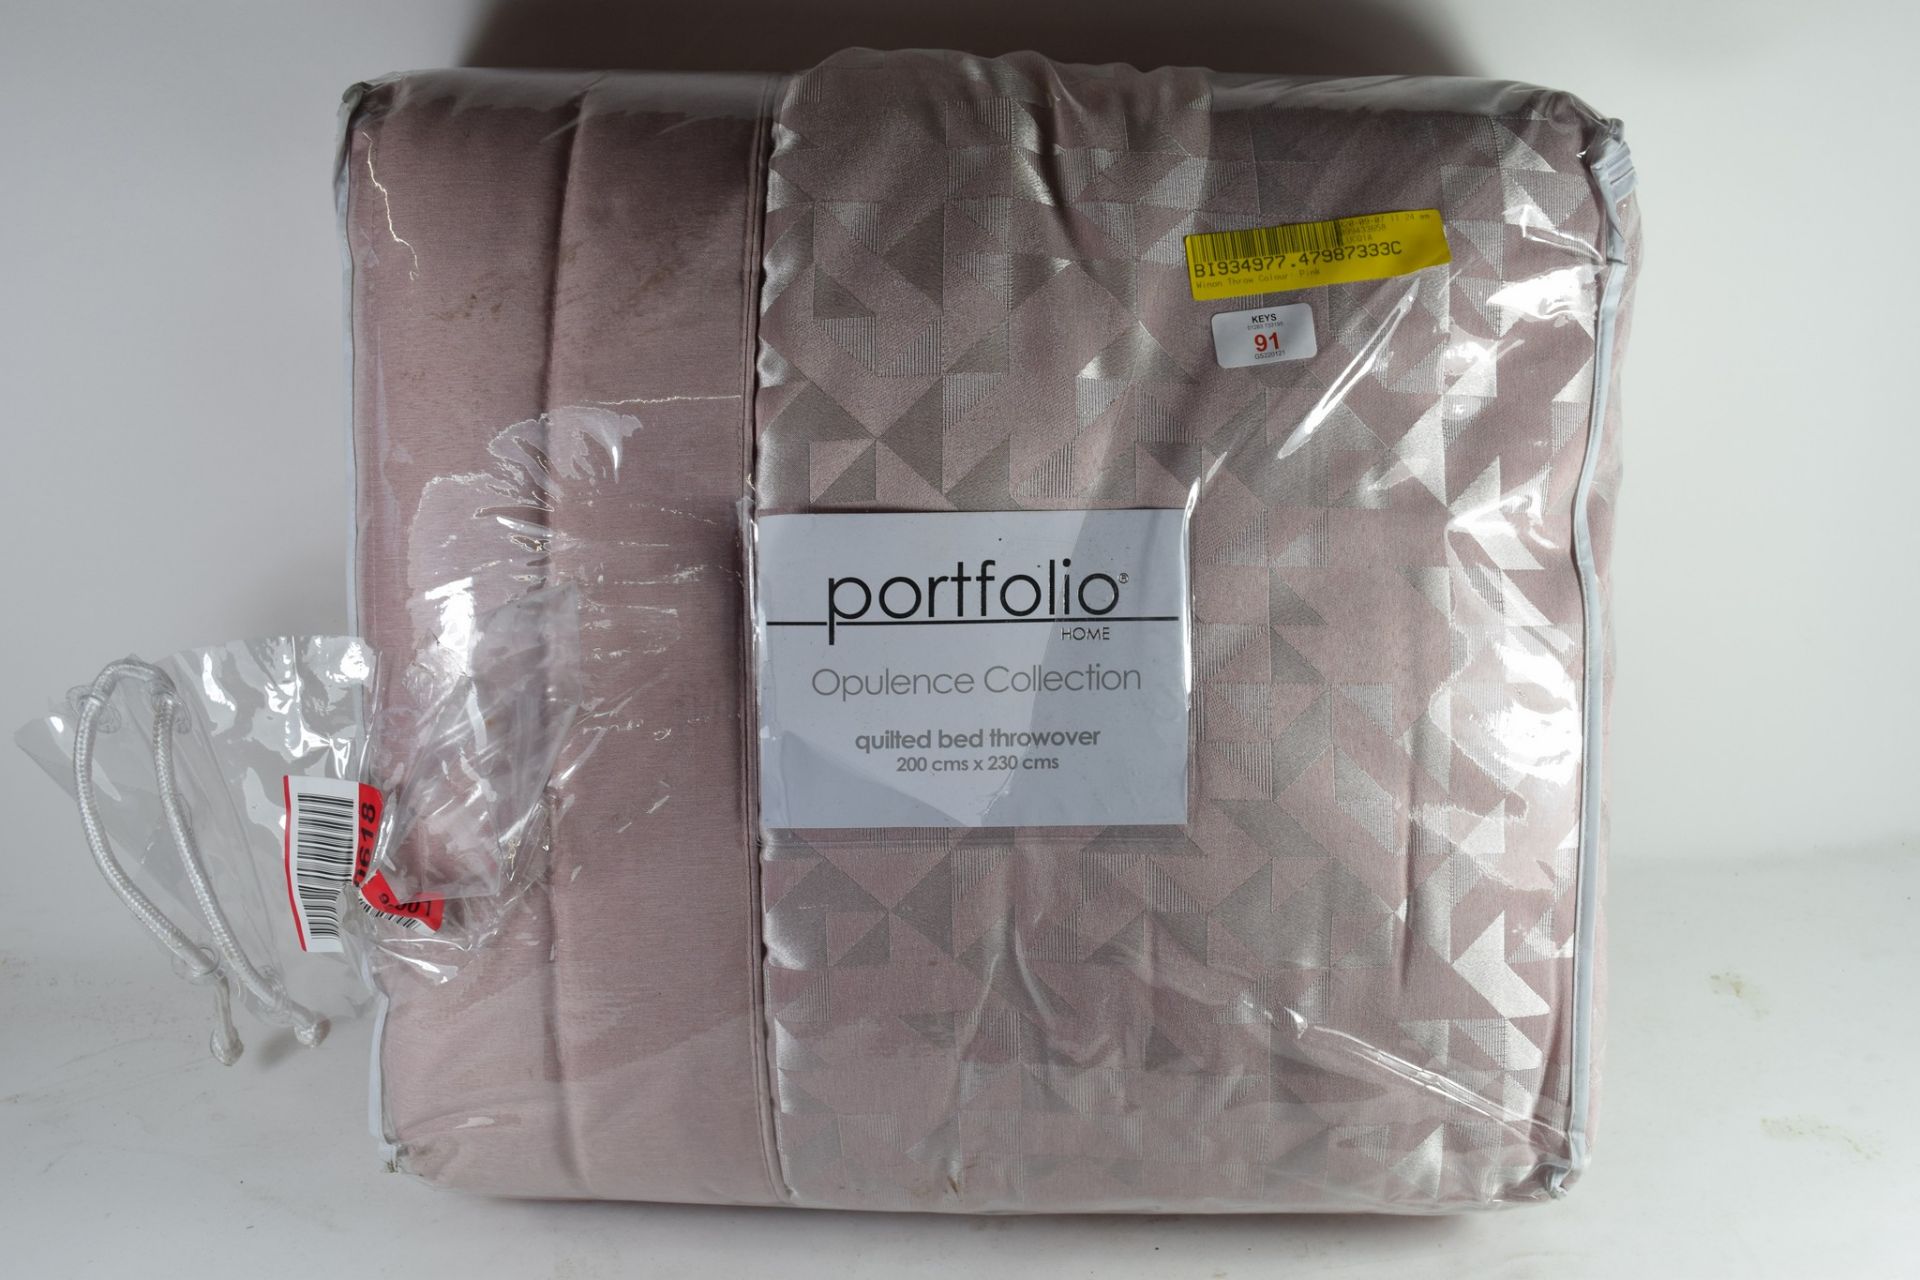 "Canora Grey" Winon Throw, Colour: Pink. RRP £49.99